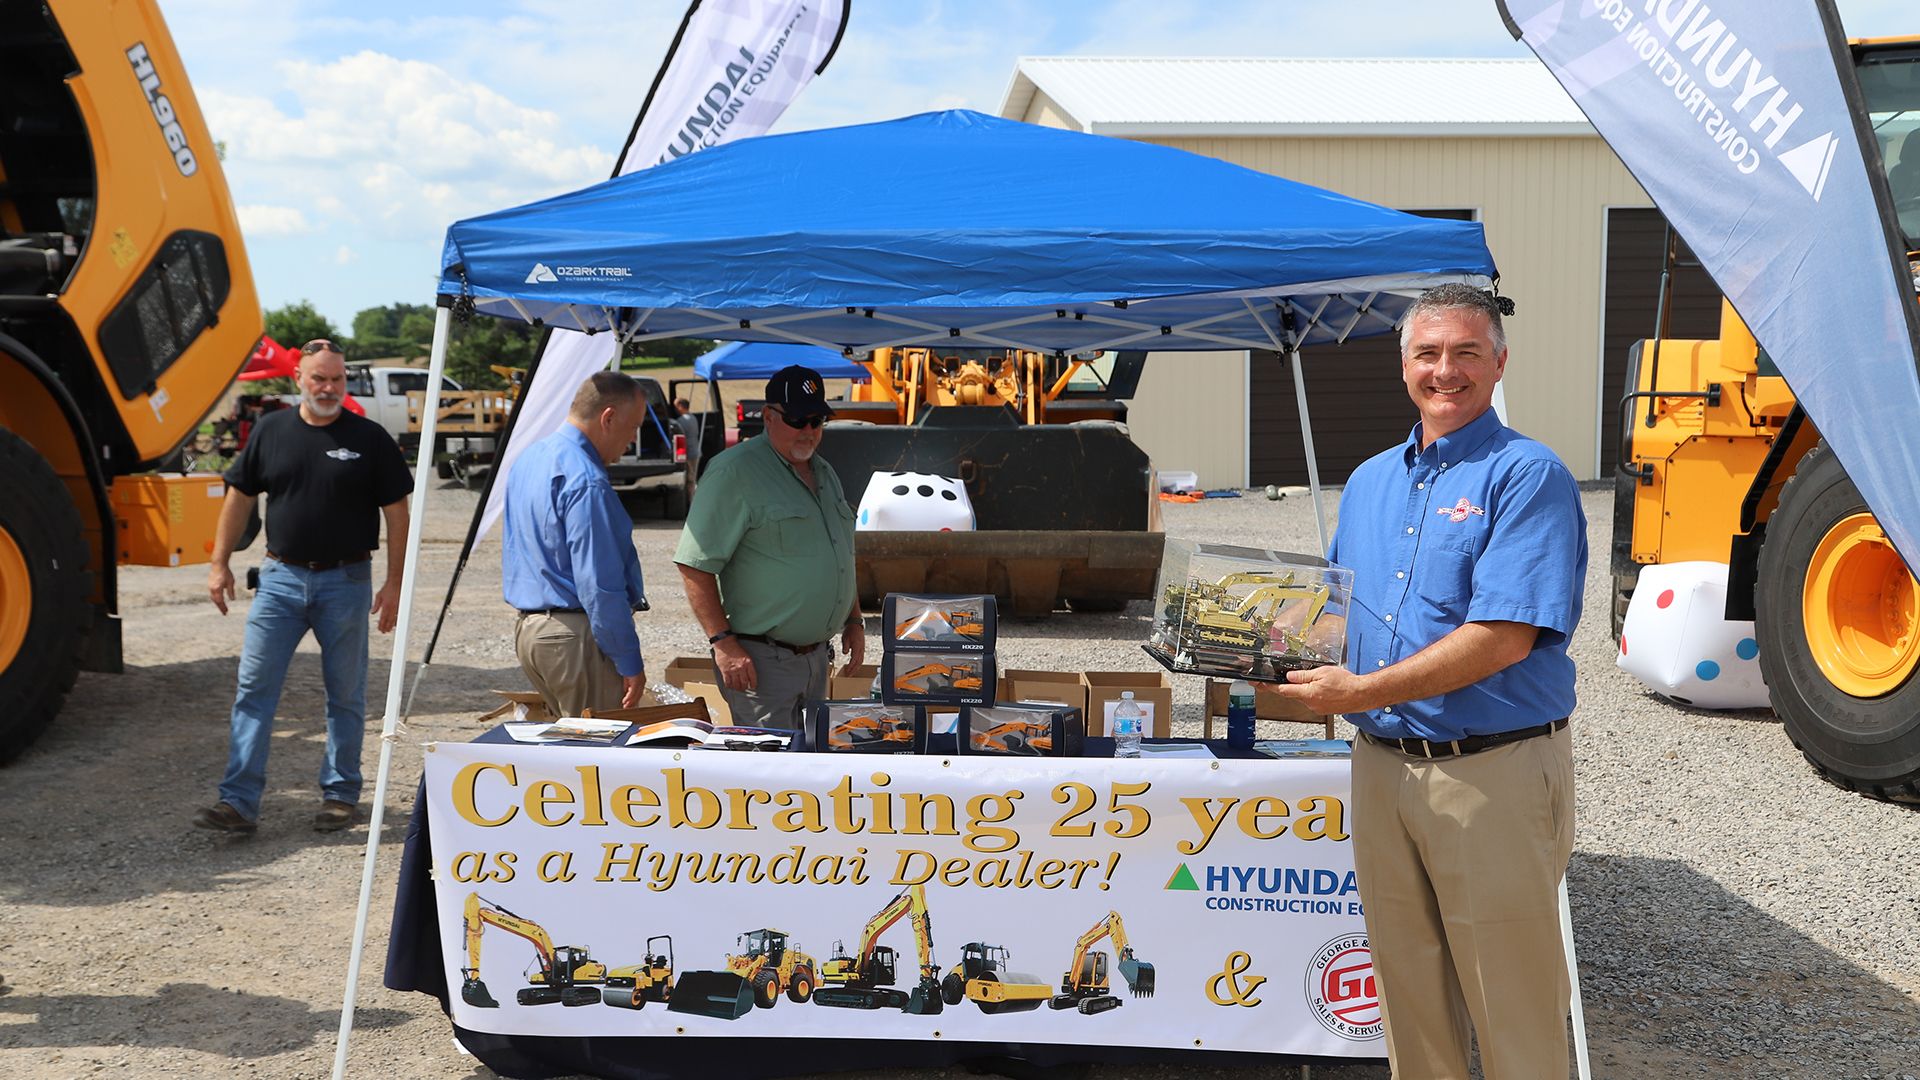 Greg Newell George & Swede Sales & Service, Owner Poses With the Hyundai Dealer 25 Year Anniversary Golden Excavator Award